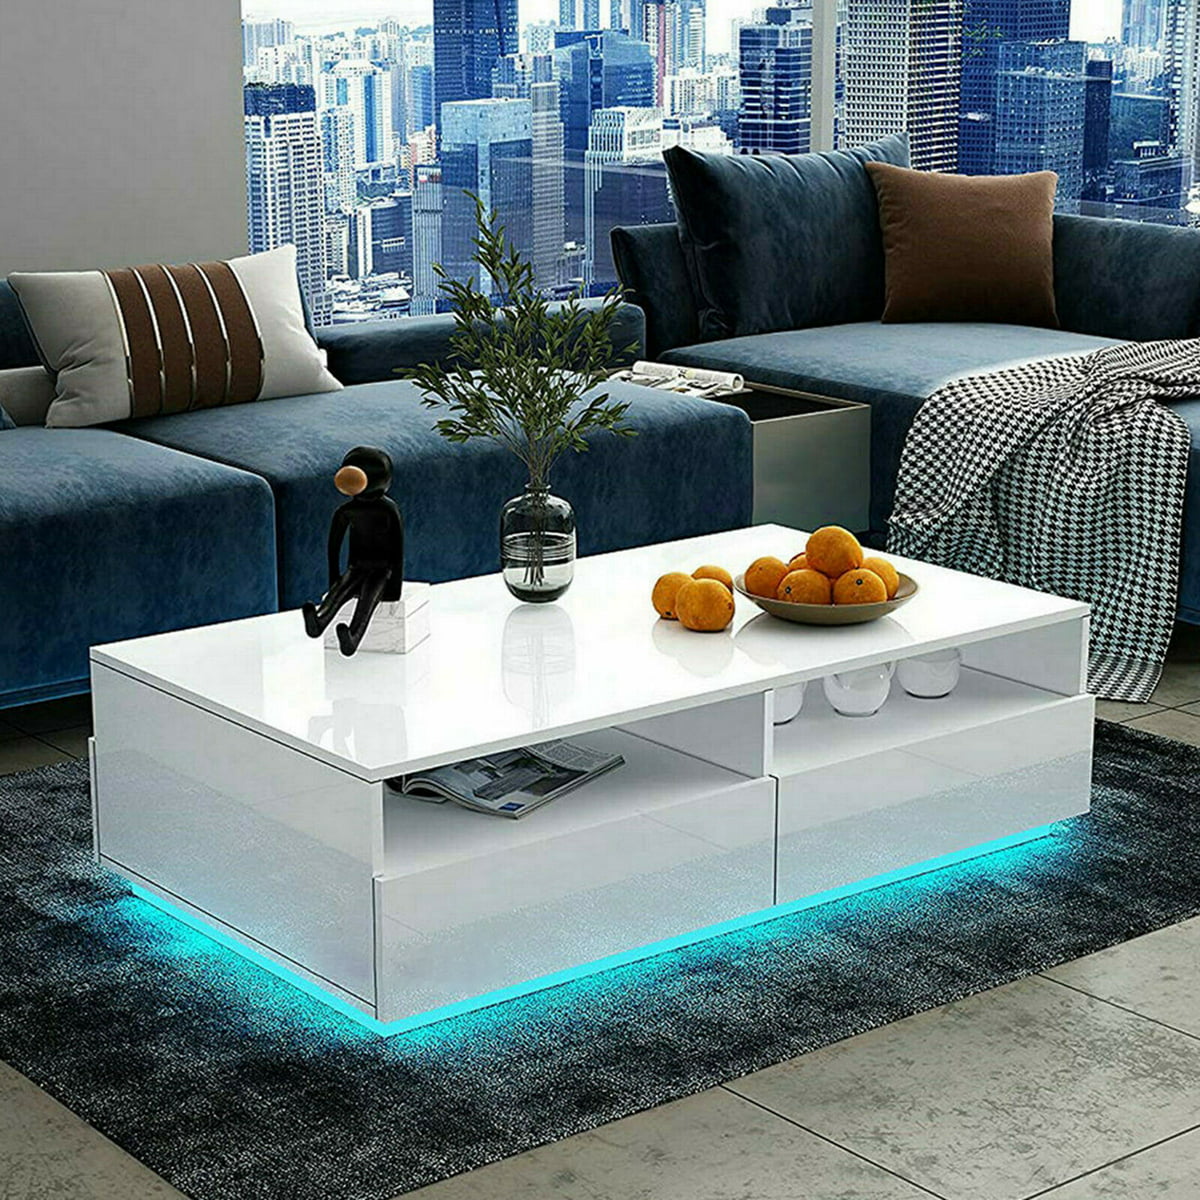 ORA HOME COFFEE TABLE: LED FURNITURE WITH STYLISH STORAGE SPACE - MOREE